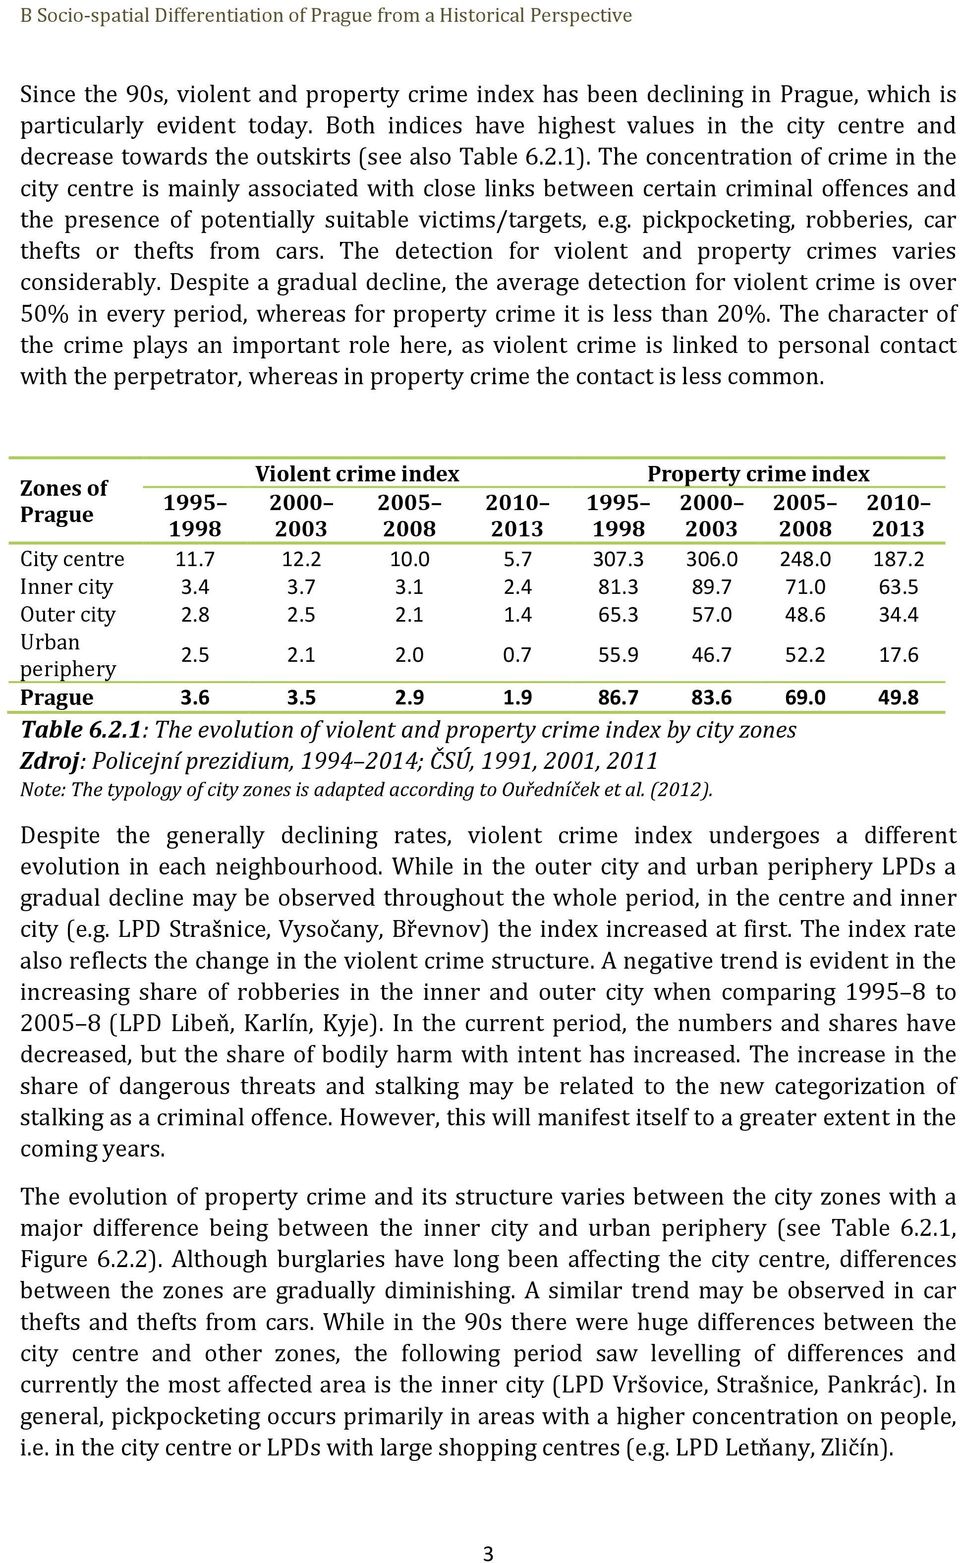 The concentration of crime in the city centre is mainly associated with close links between certain criminal offences and the presence of potentially suitable victims/targe